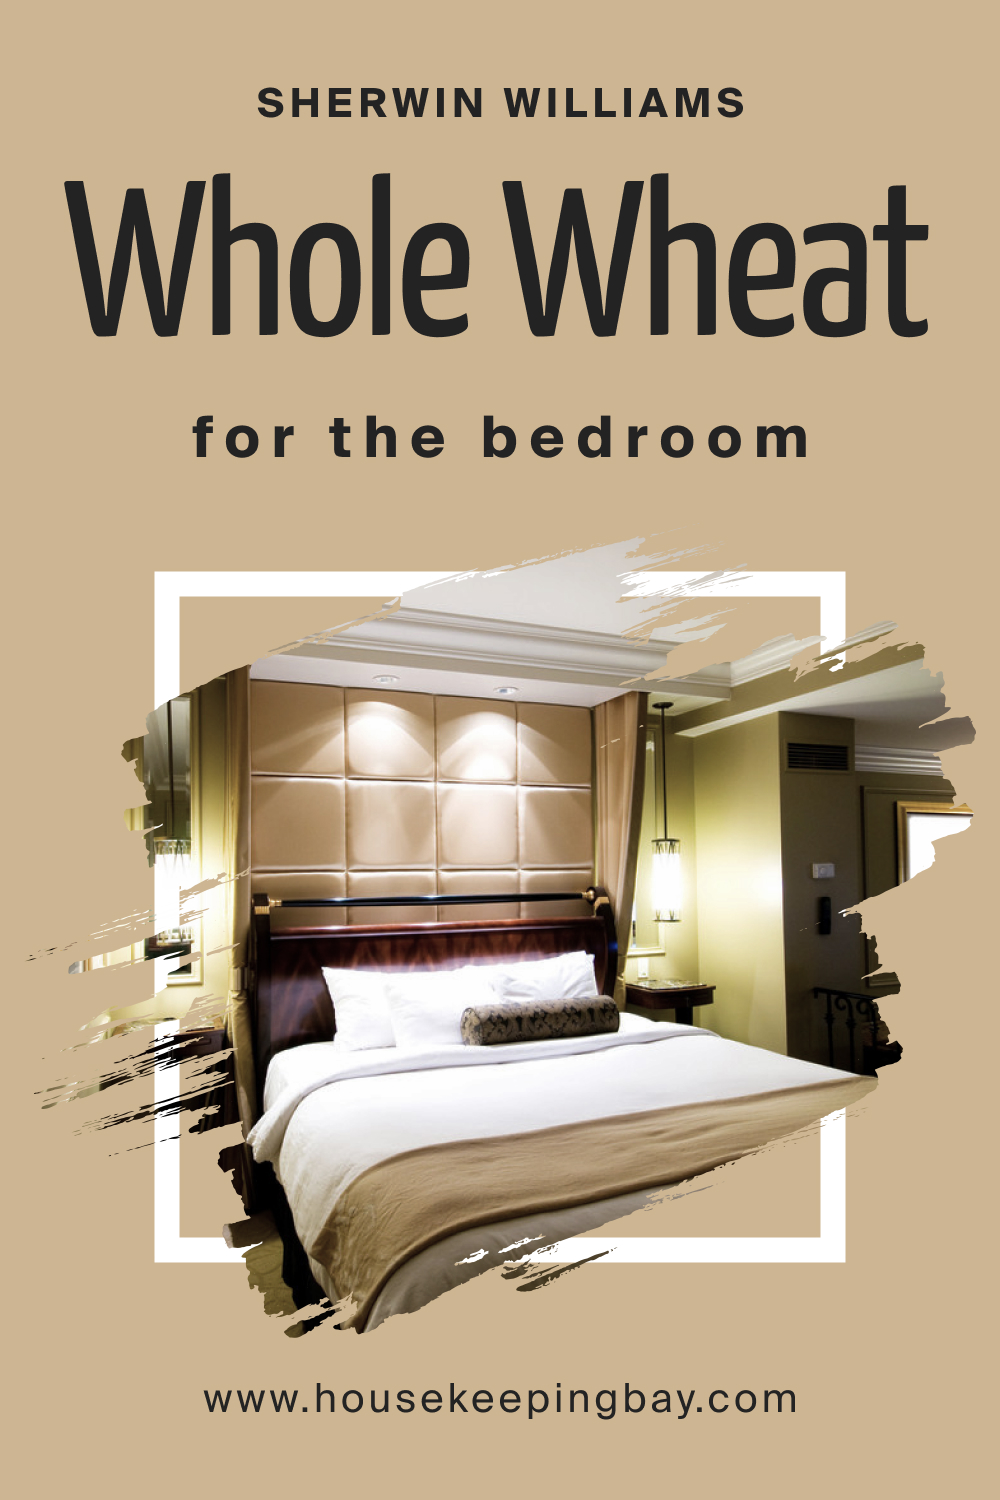 Sherwin Williams. SW Whole Wheat For the bedroom